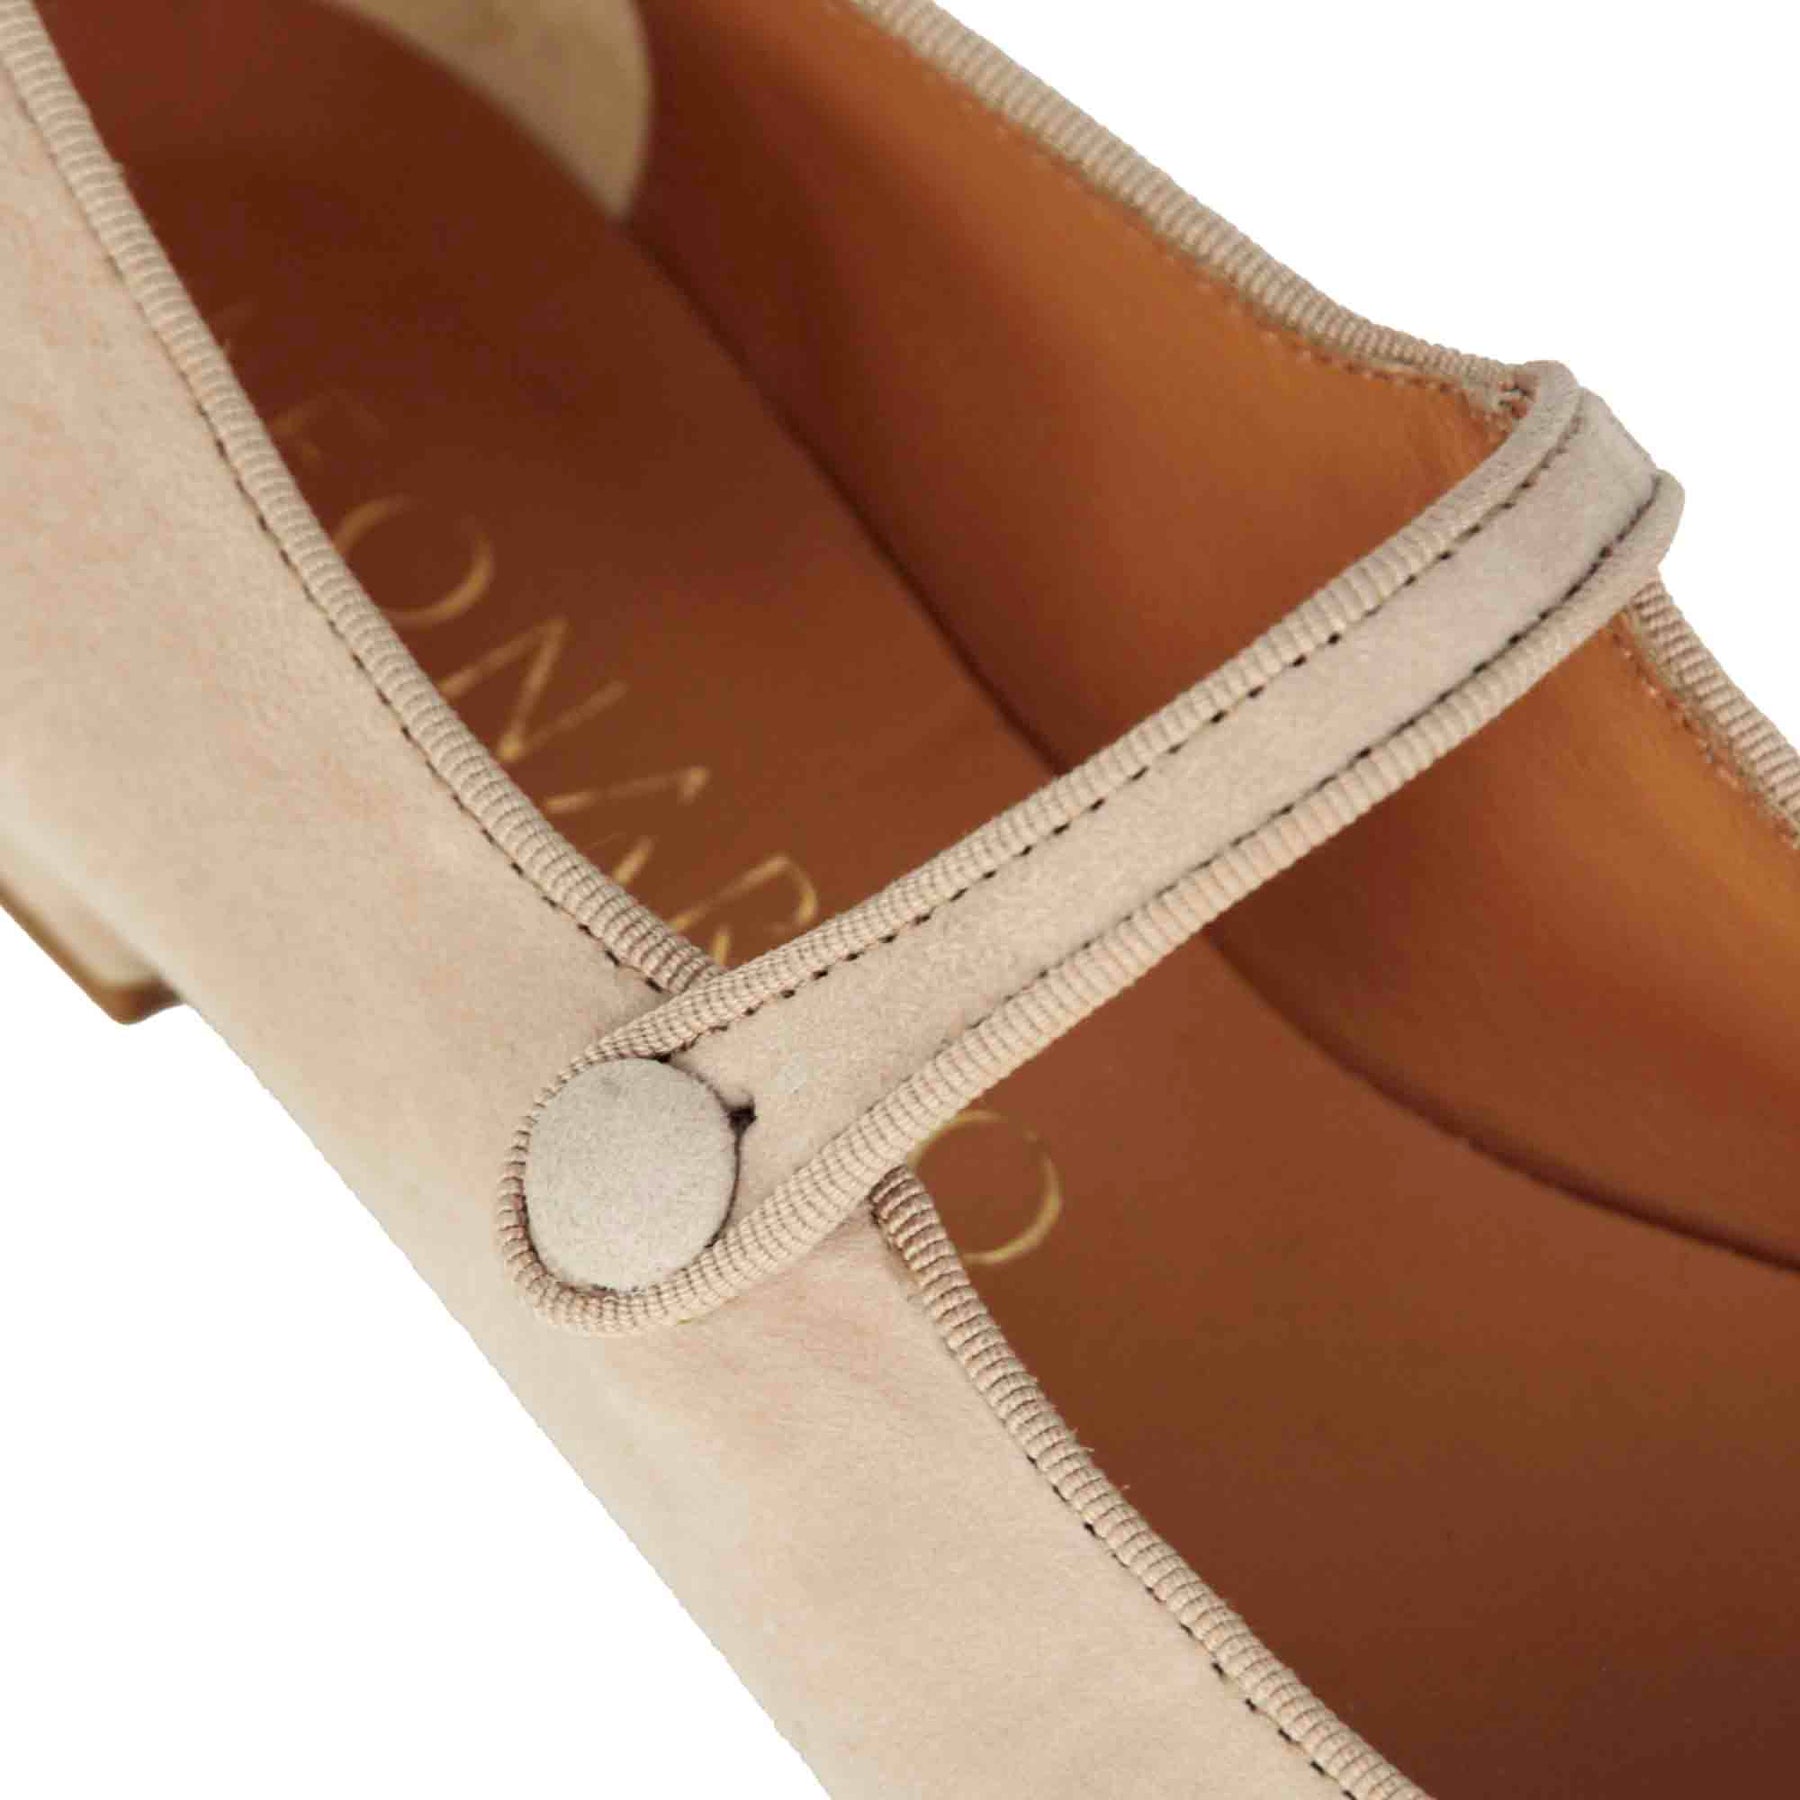 Women's Mary Jane ballerina shoes in suede with pink strap